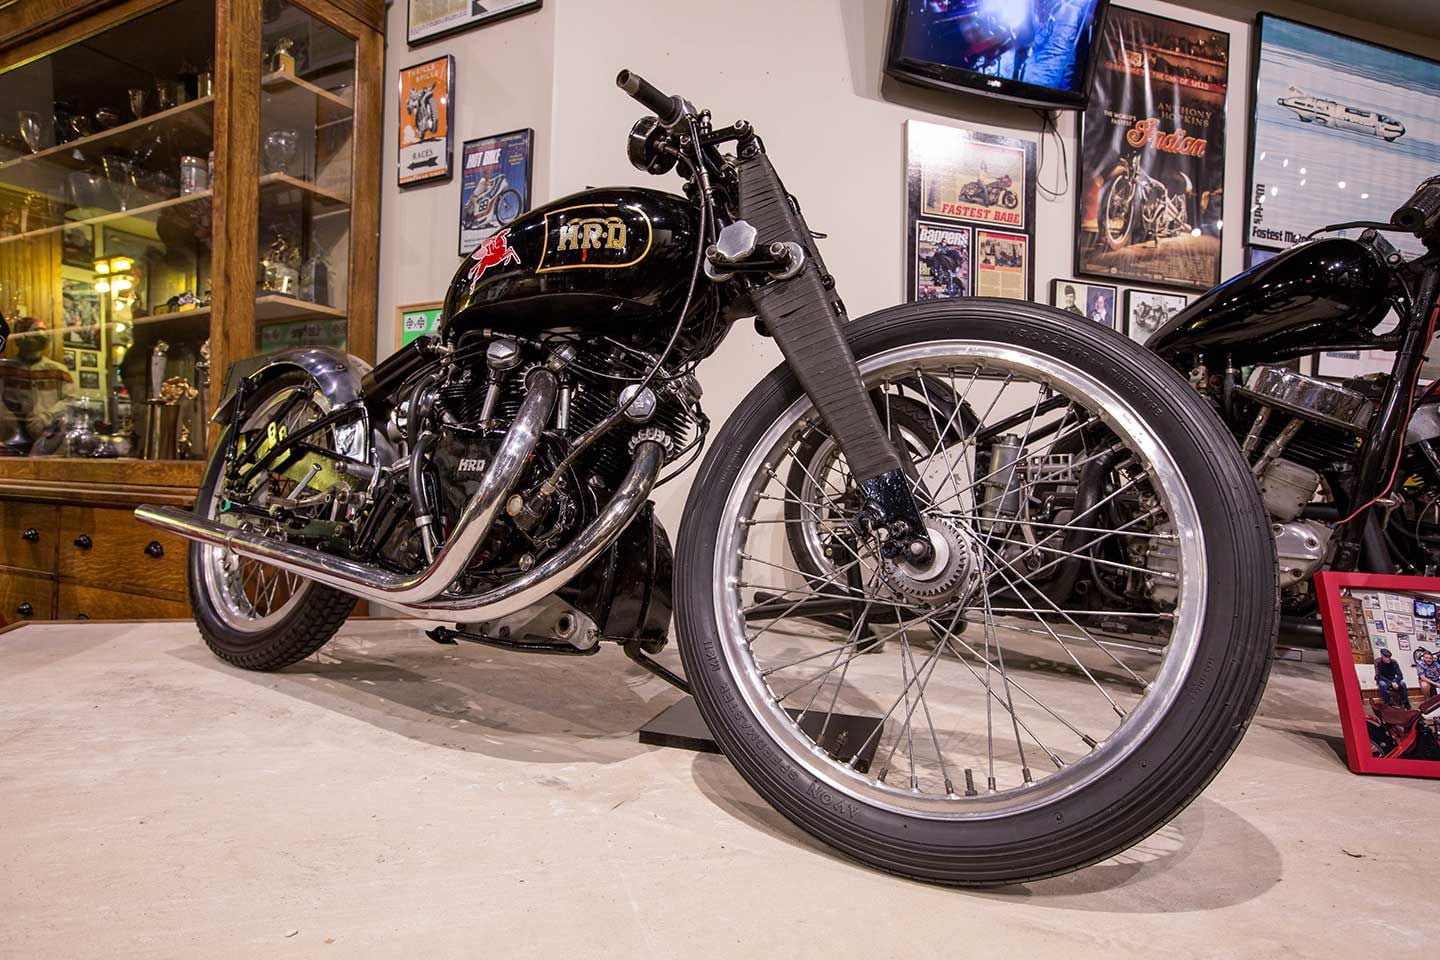 The National Motorcycle Museum housed many iconic motorcycles over the years, including Rollie Free’s 1948 Vincent HRD.